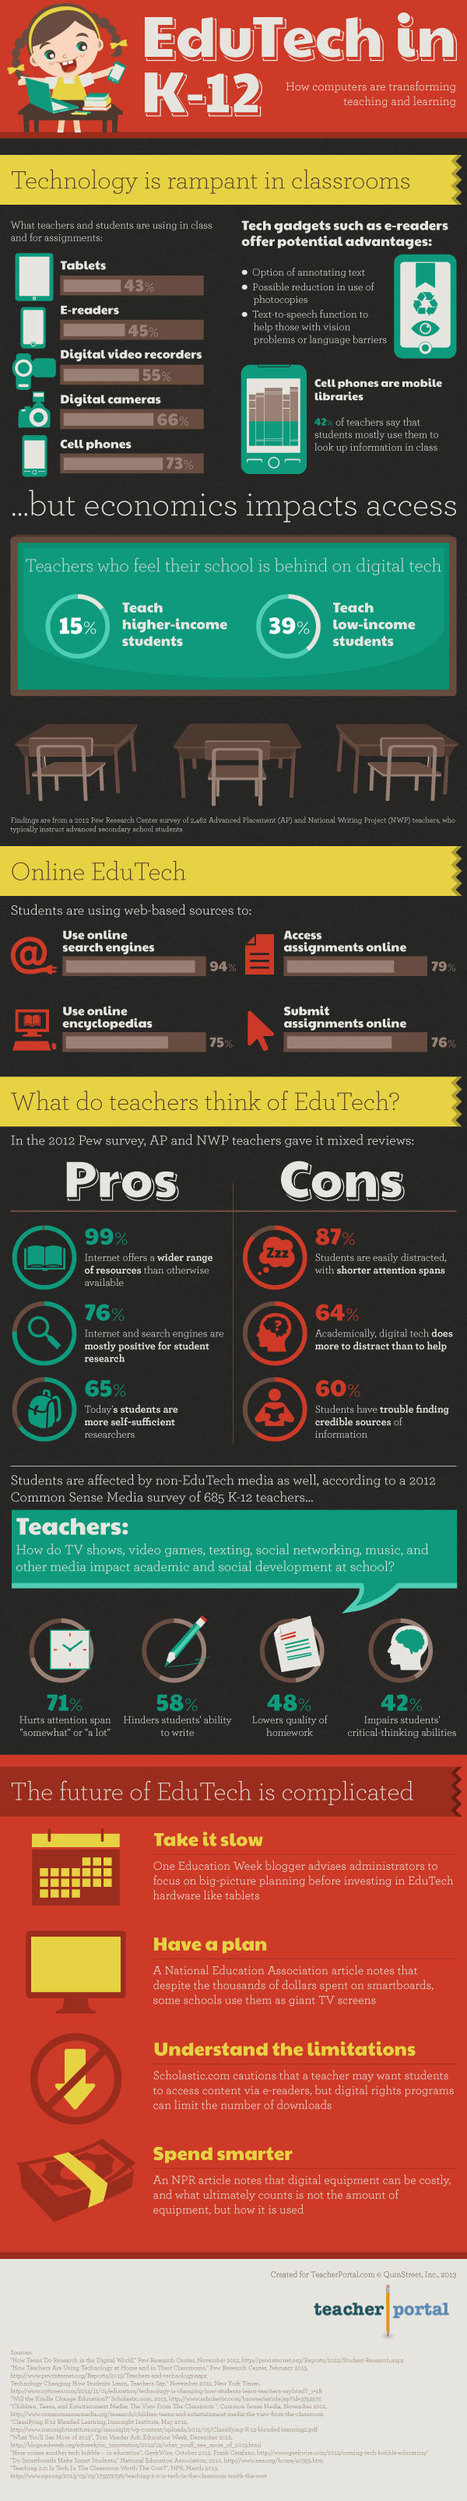 EduTech in K-12: How Computers are Transforming Teaching and Learning [Infographic] | 21st Century Learning and Teaching | Scoop.it